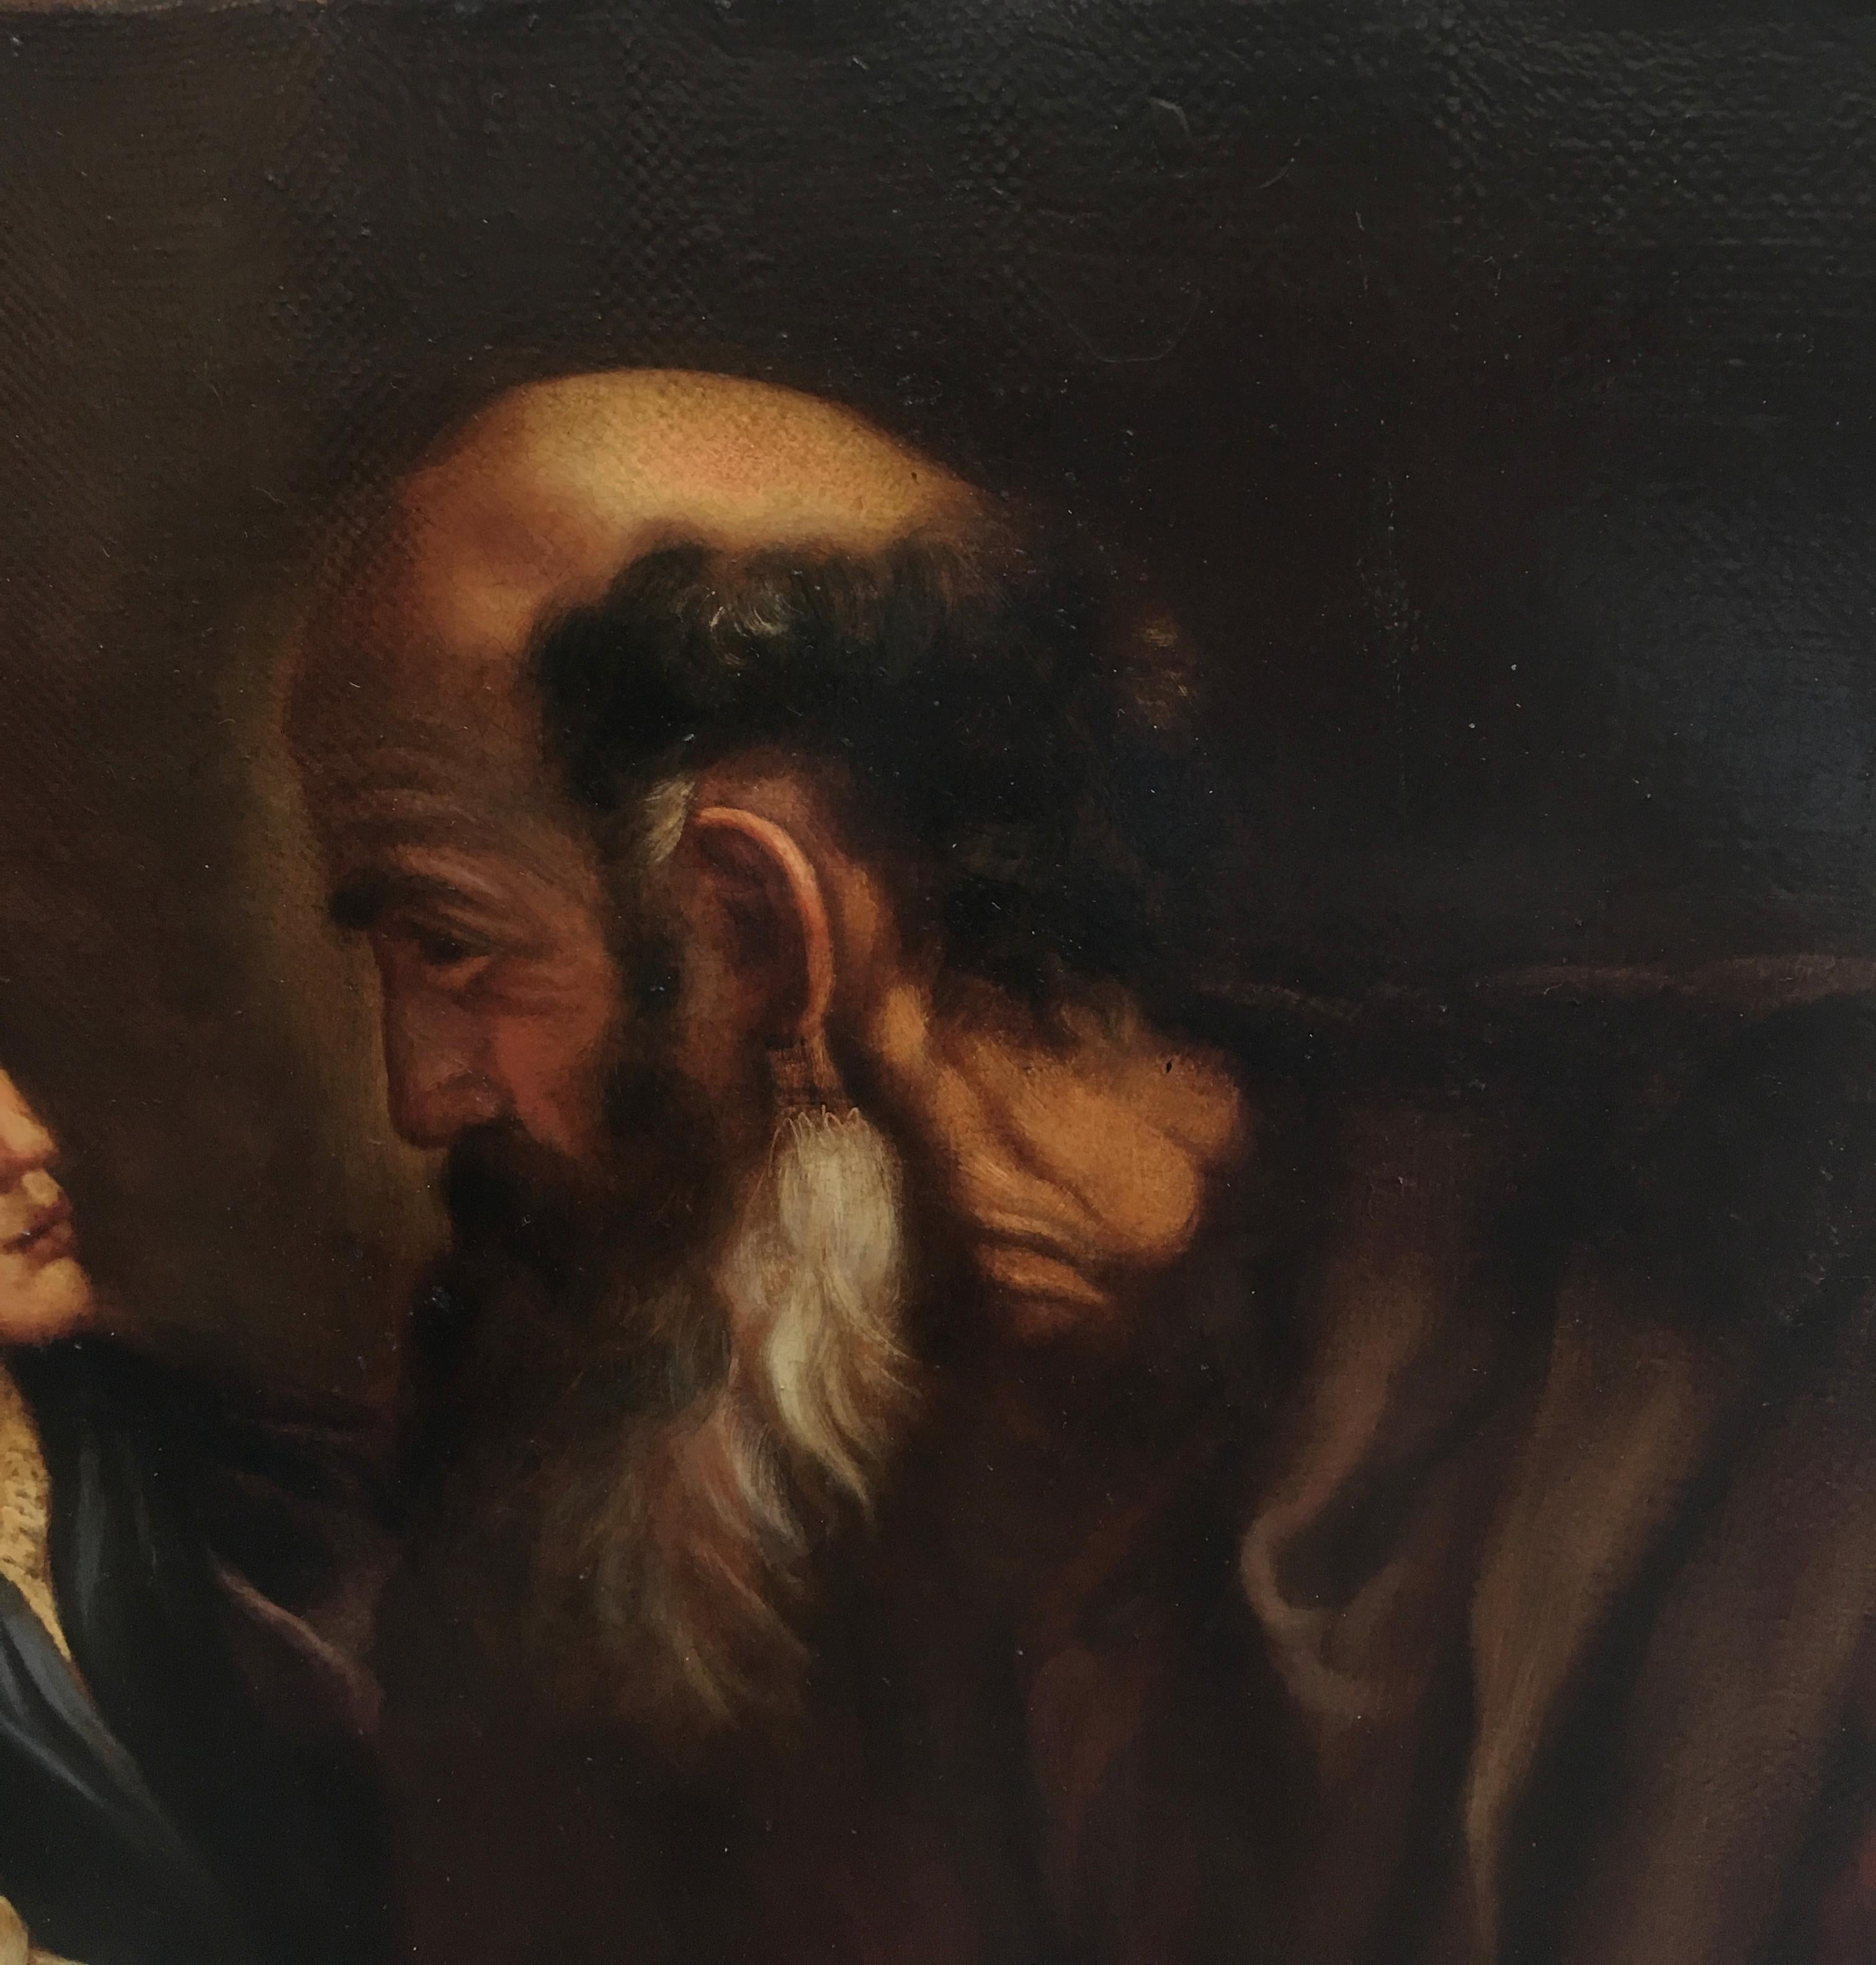 Youth and wisdom -Ciro De Rosa Italia 2007 - Oil on canvas cm.60x50
The painting by Ciro De Rosa is a beautiful reinterpretation of the famous biblical painting 